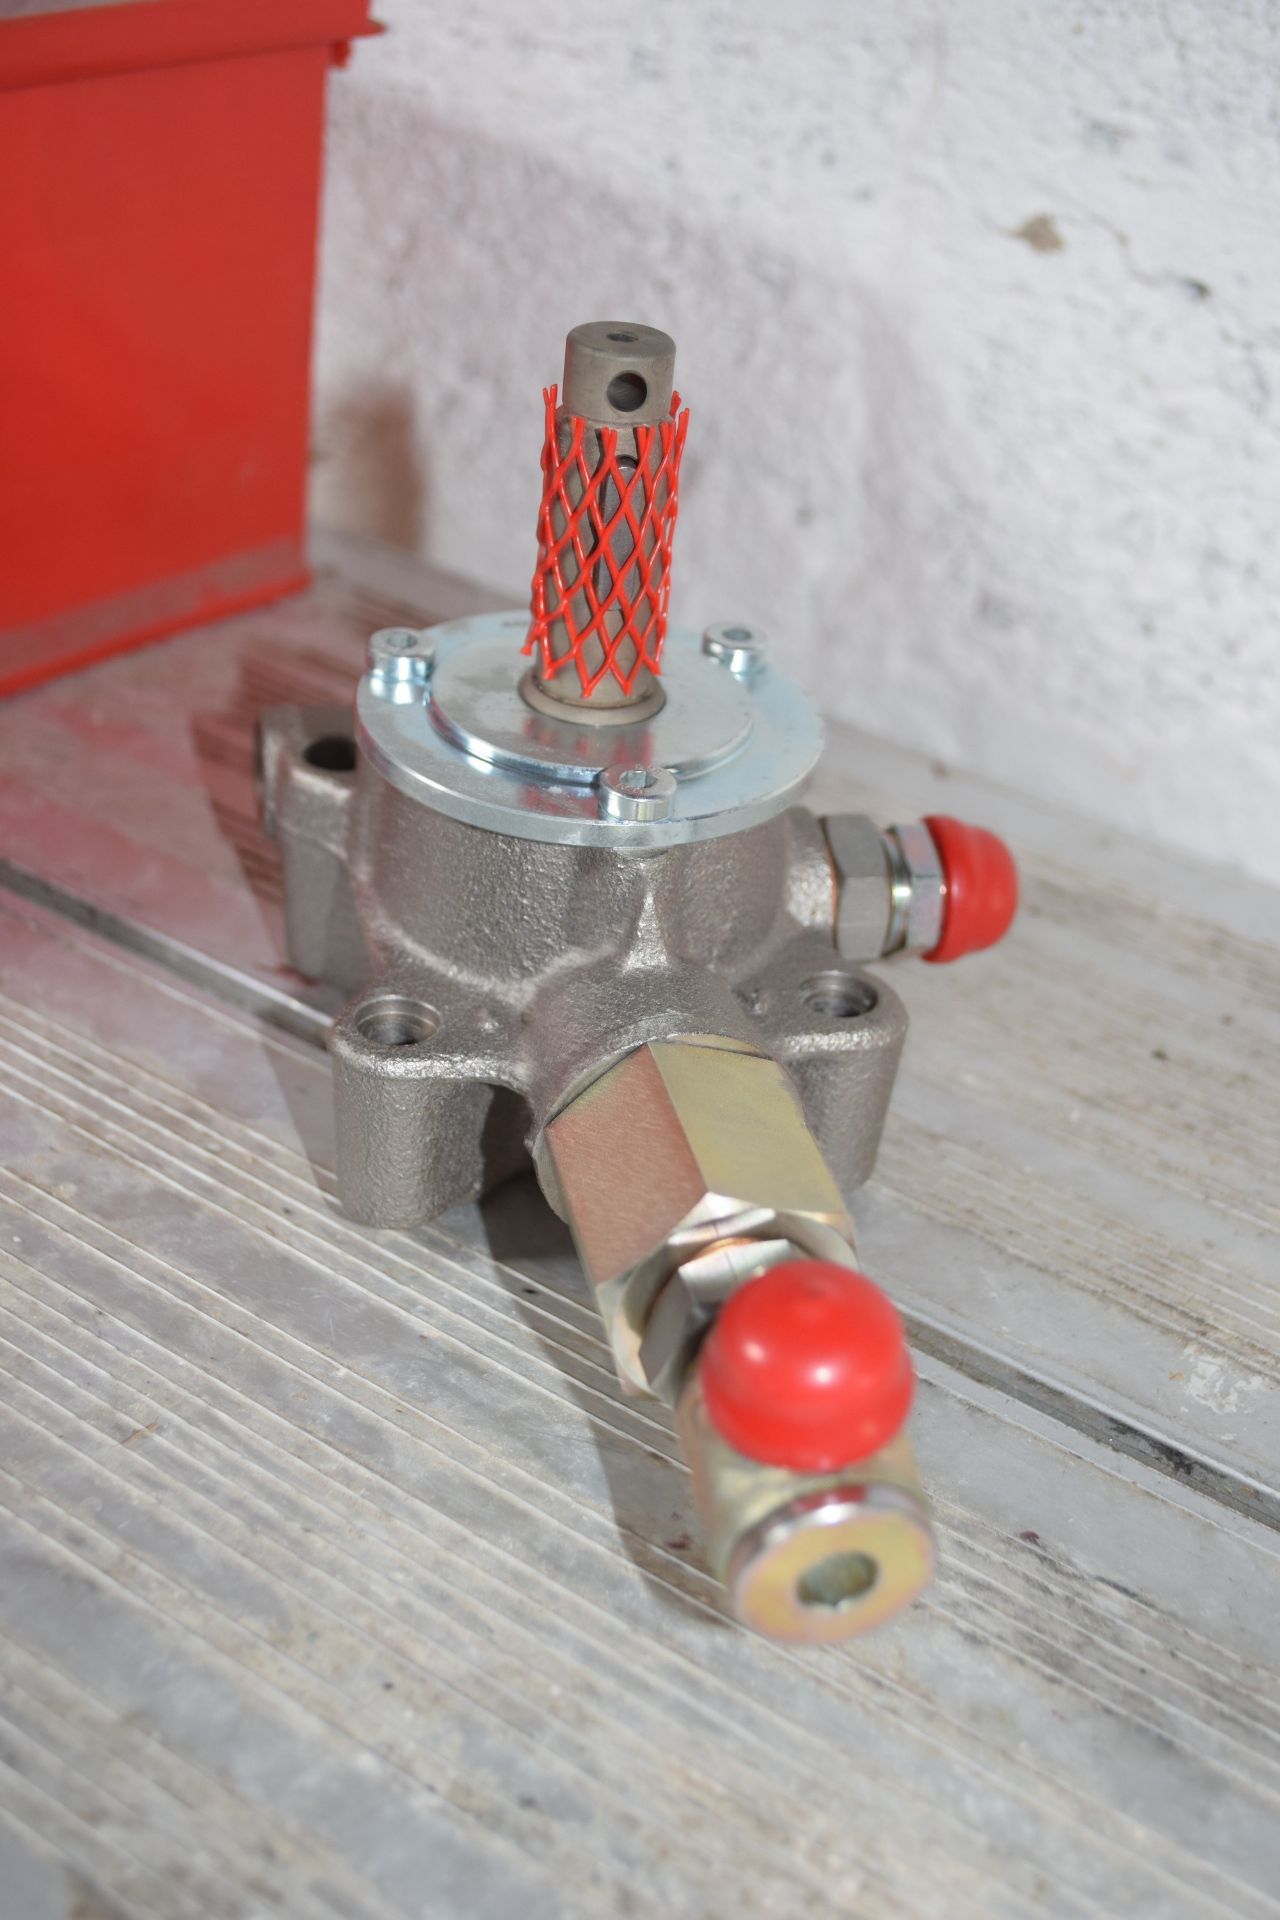 Weishaupt fuse metering valve for RL5 - Image 2 of 2